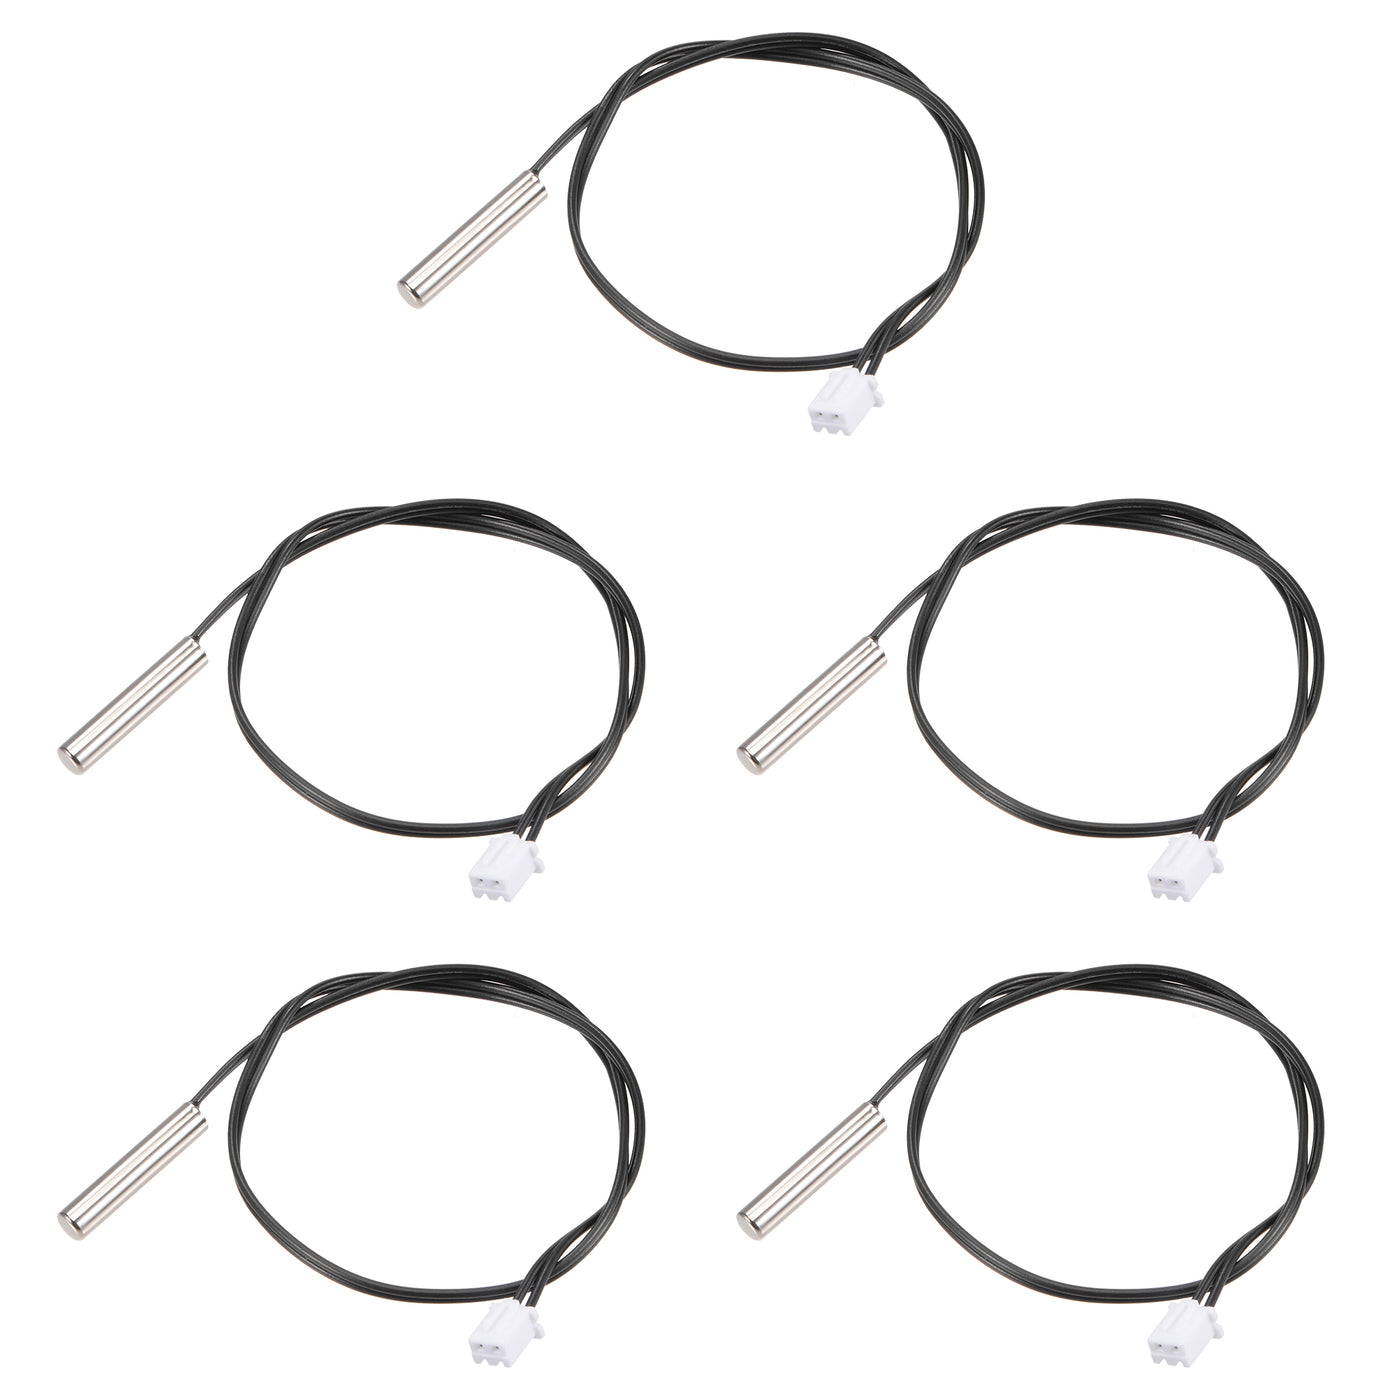 uxcell Uxcell 5pcs 15K Temperature Sensor Probe, Stainless Steel NTC Thermal Sensor Probe 30cm Digital Thermometer Extension Cable